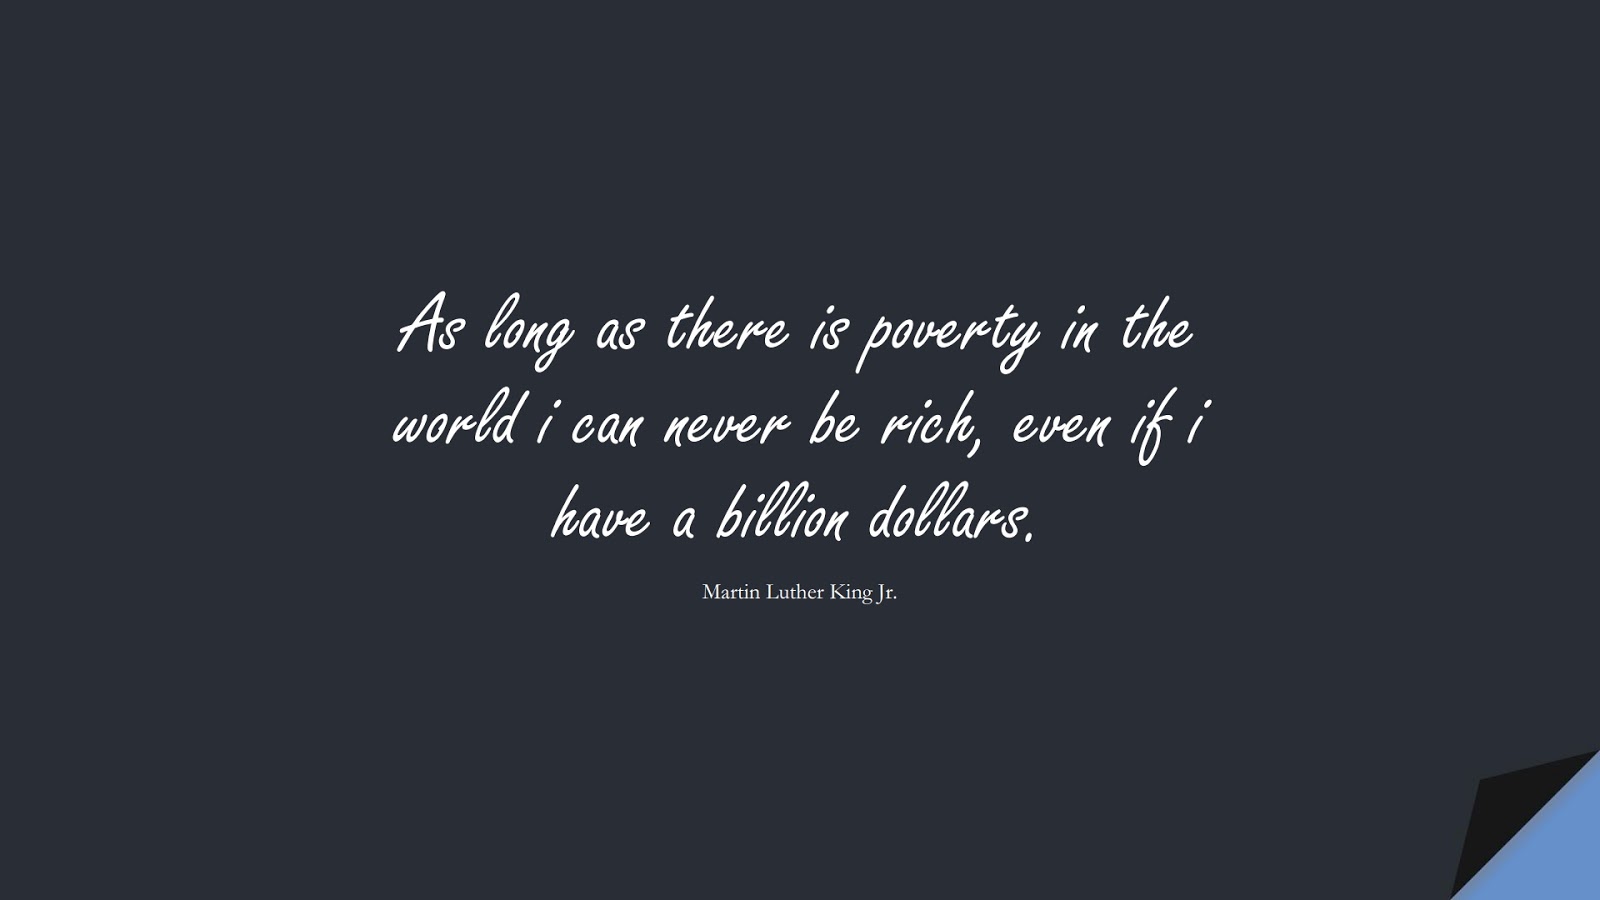 As long as there is poverty in the world i can never be rich, even if i have a billion dollars. (Martin Luther King Jr.);  #MartinLutherKingJrQuotes